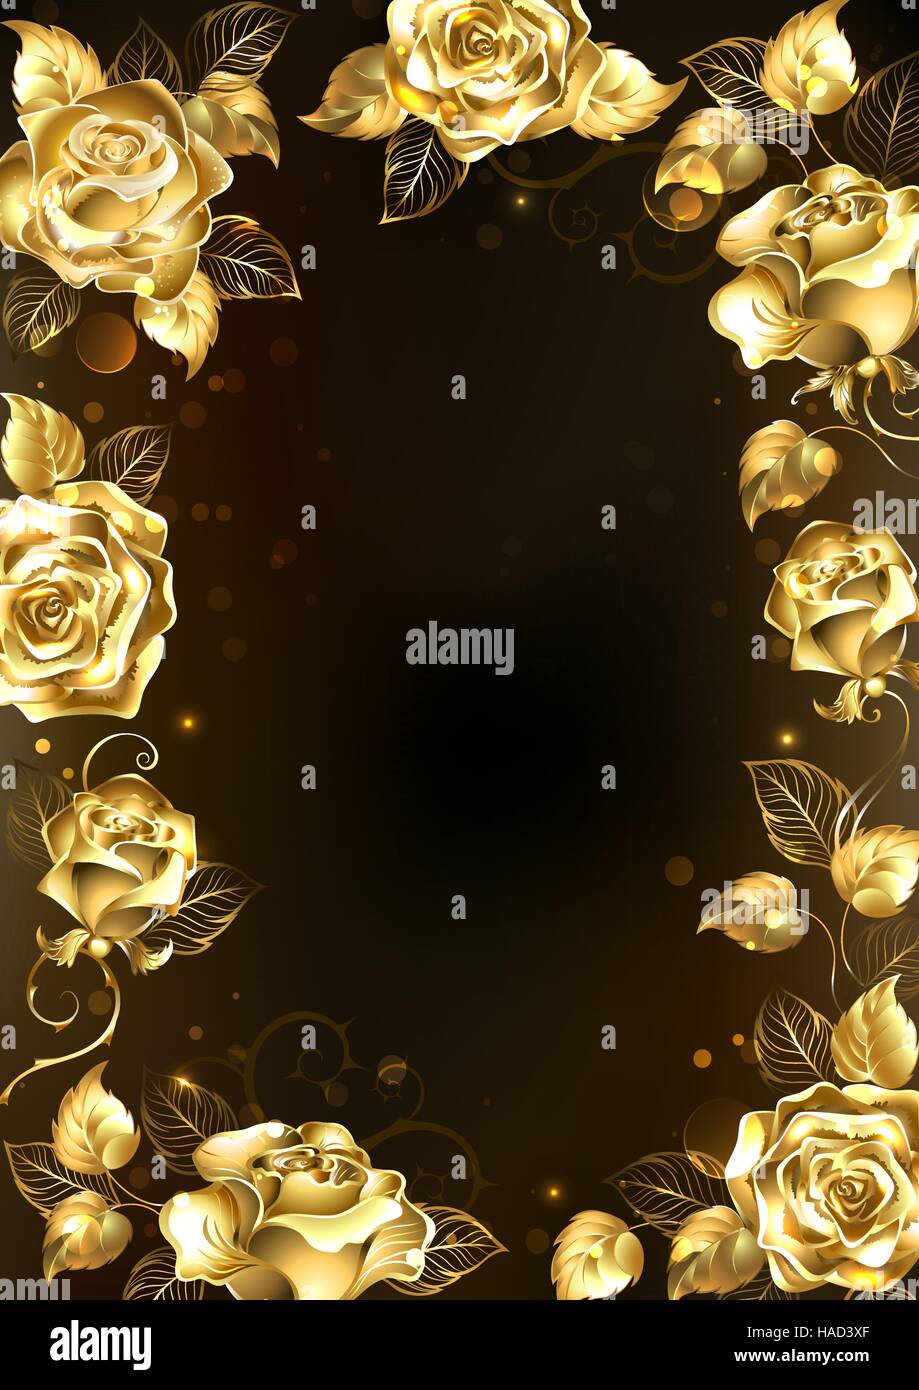 Frame with sparkling jewelry, gold roses on a black background. Gold